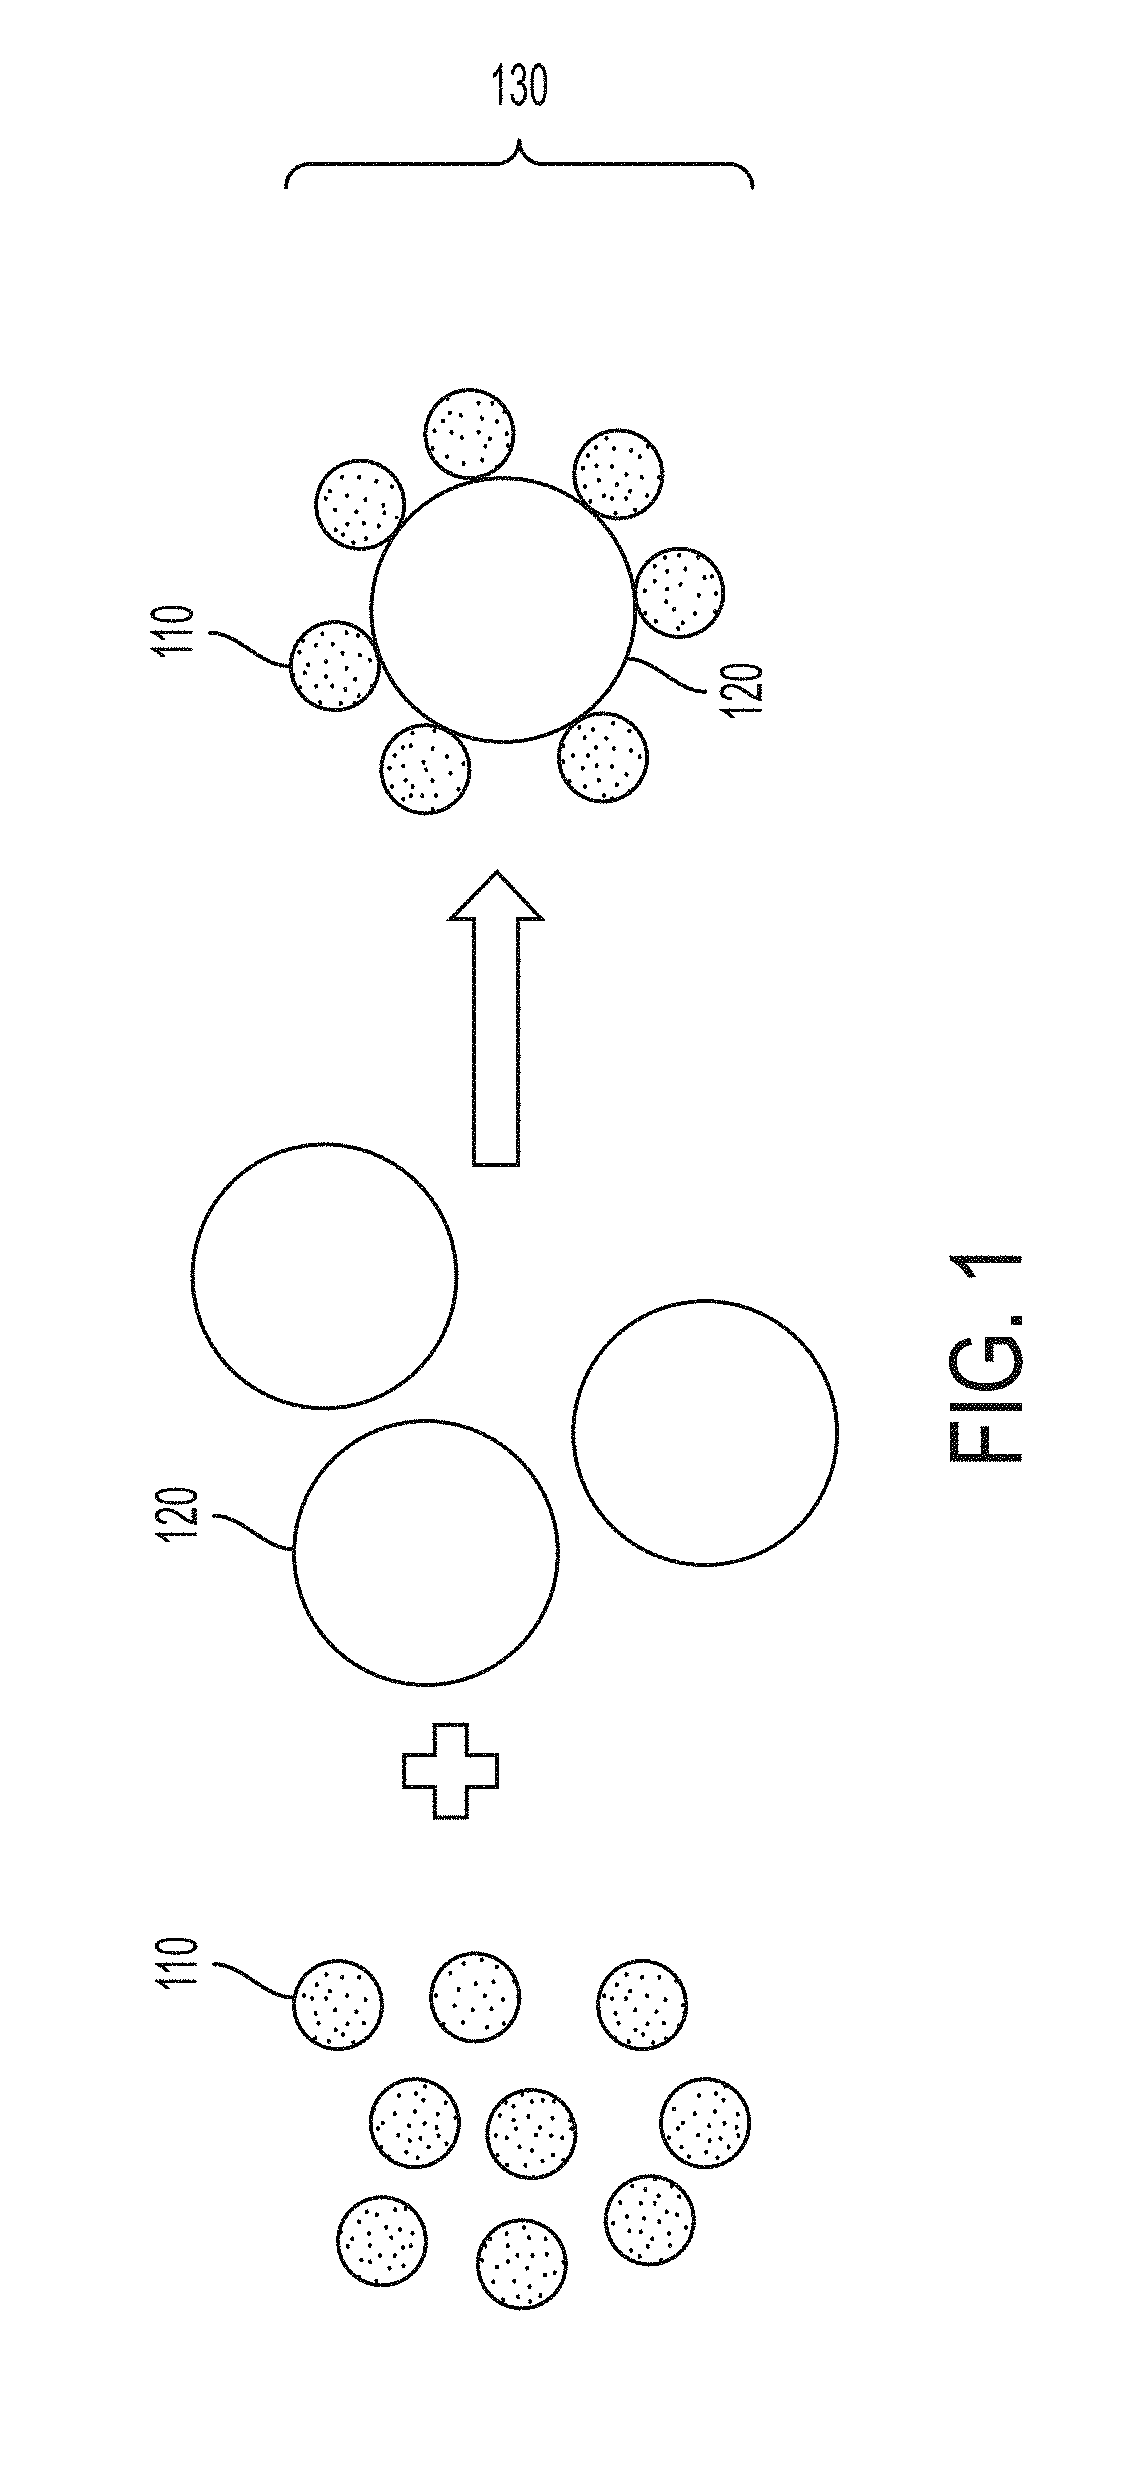 Nanoparticle composite welding filler materials, and methods for producing the same